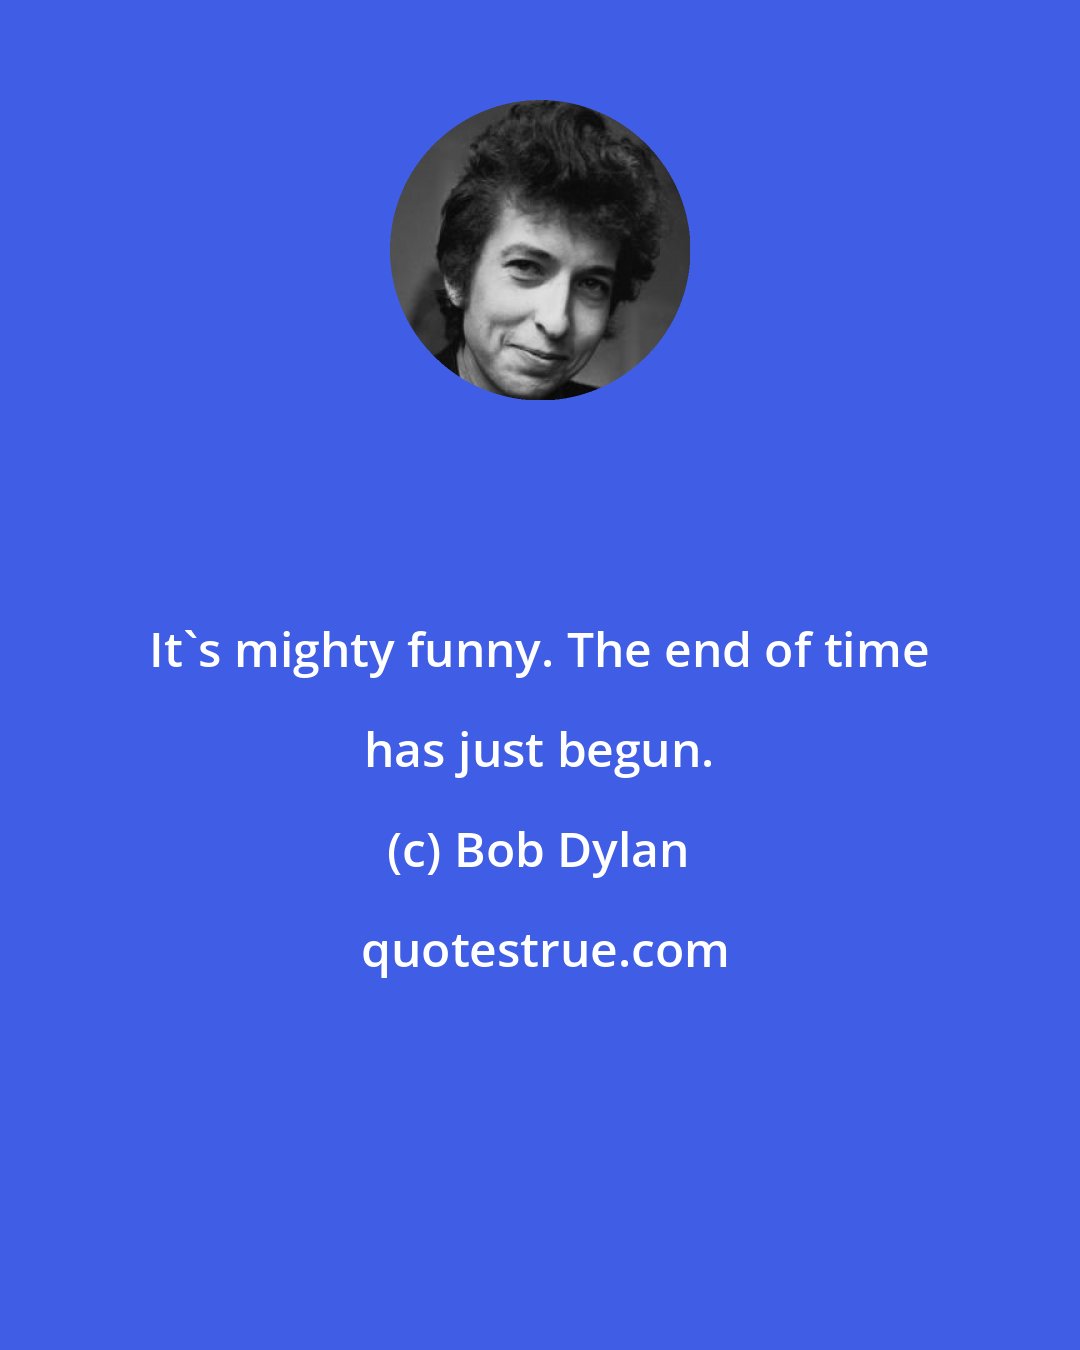 Bob Dylan: It's mighty funny. The end of time has just begun.